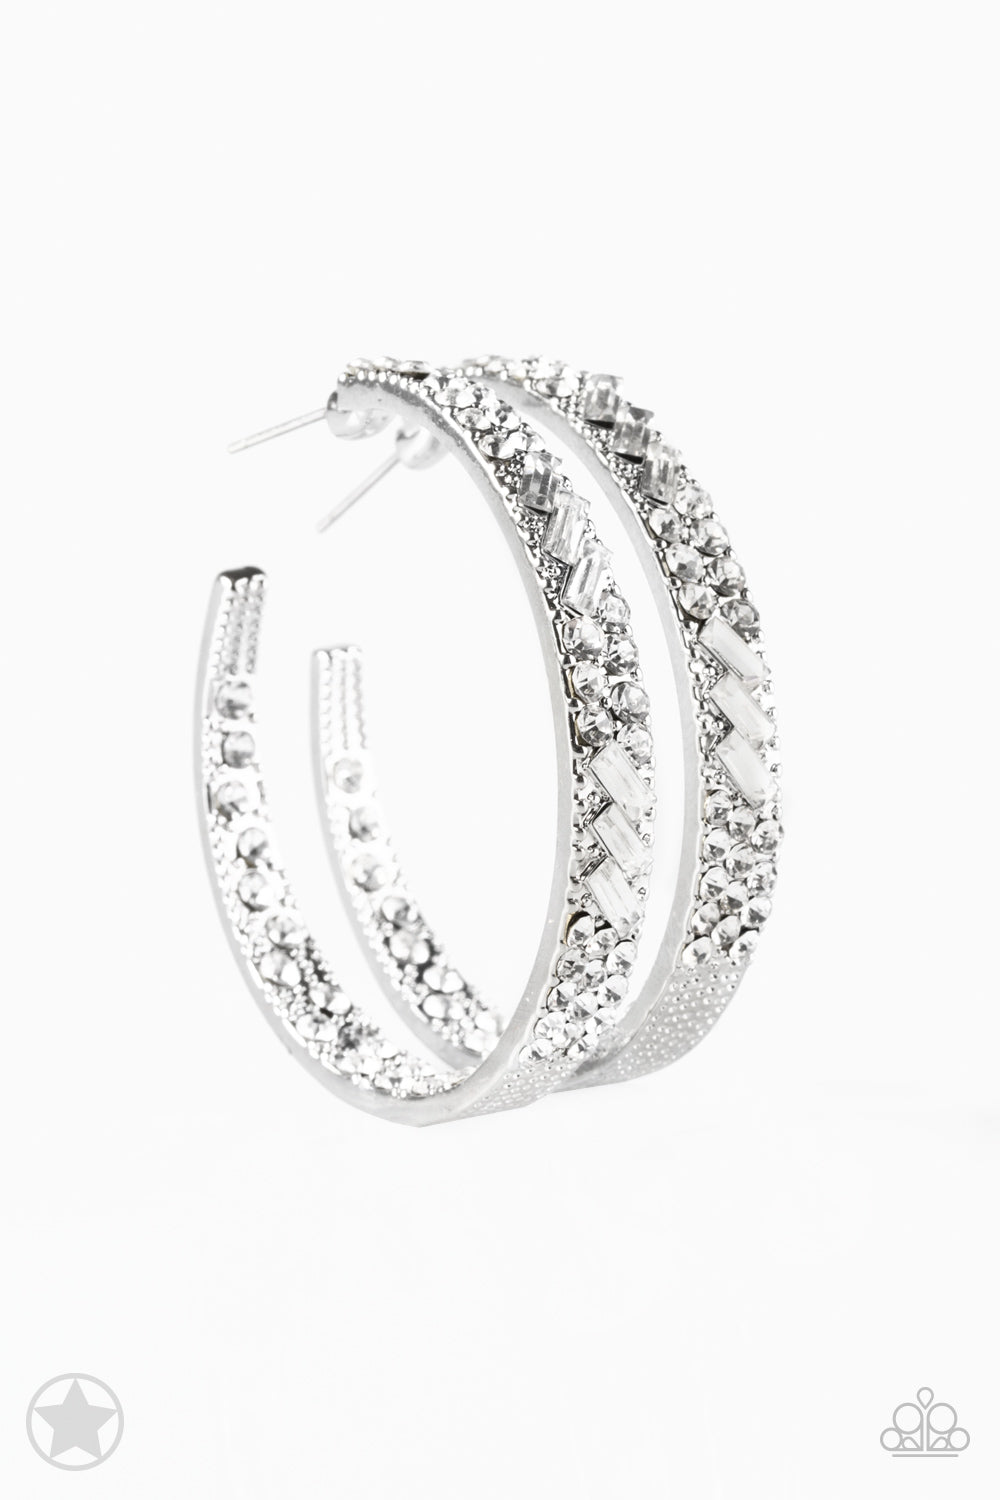 GLITZY By Association - White Earrings - TheMasterCollection